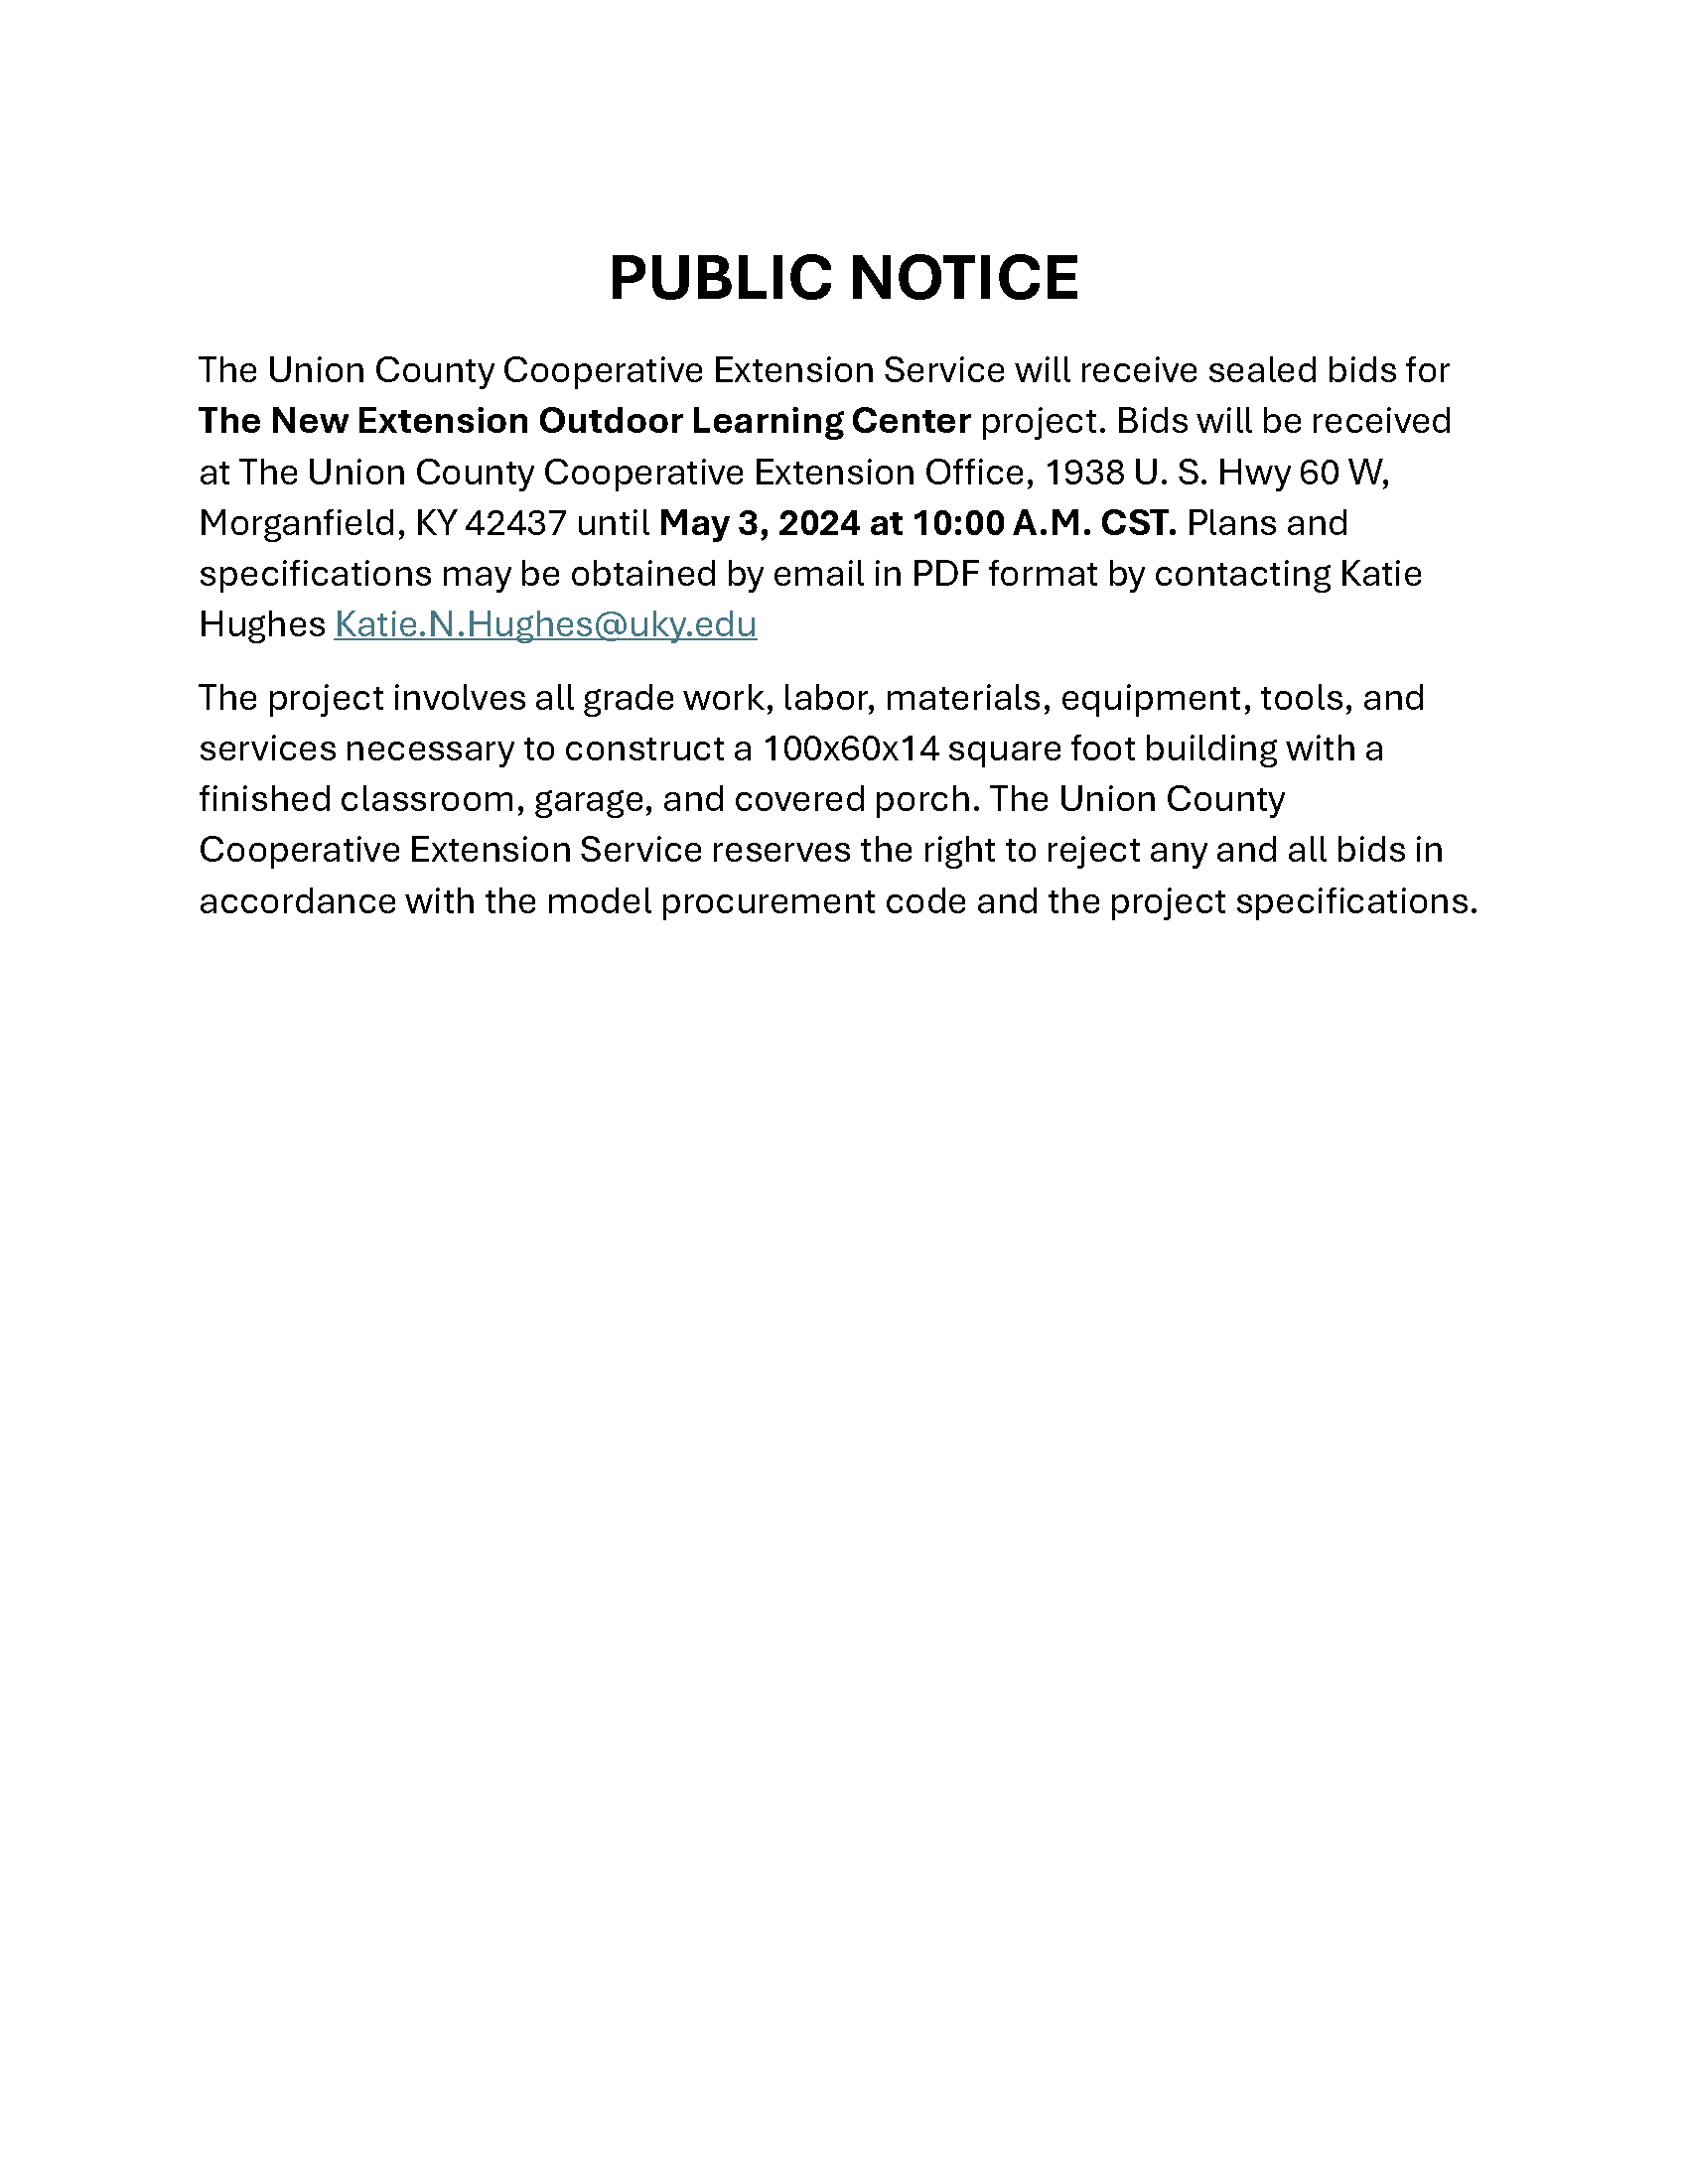 PUBLIC NOTICE INFORMATION FOR OUTDOOR LEARNING CENTER